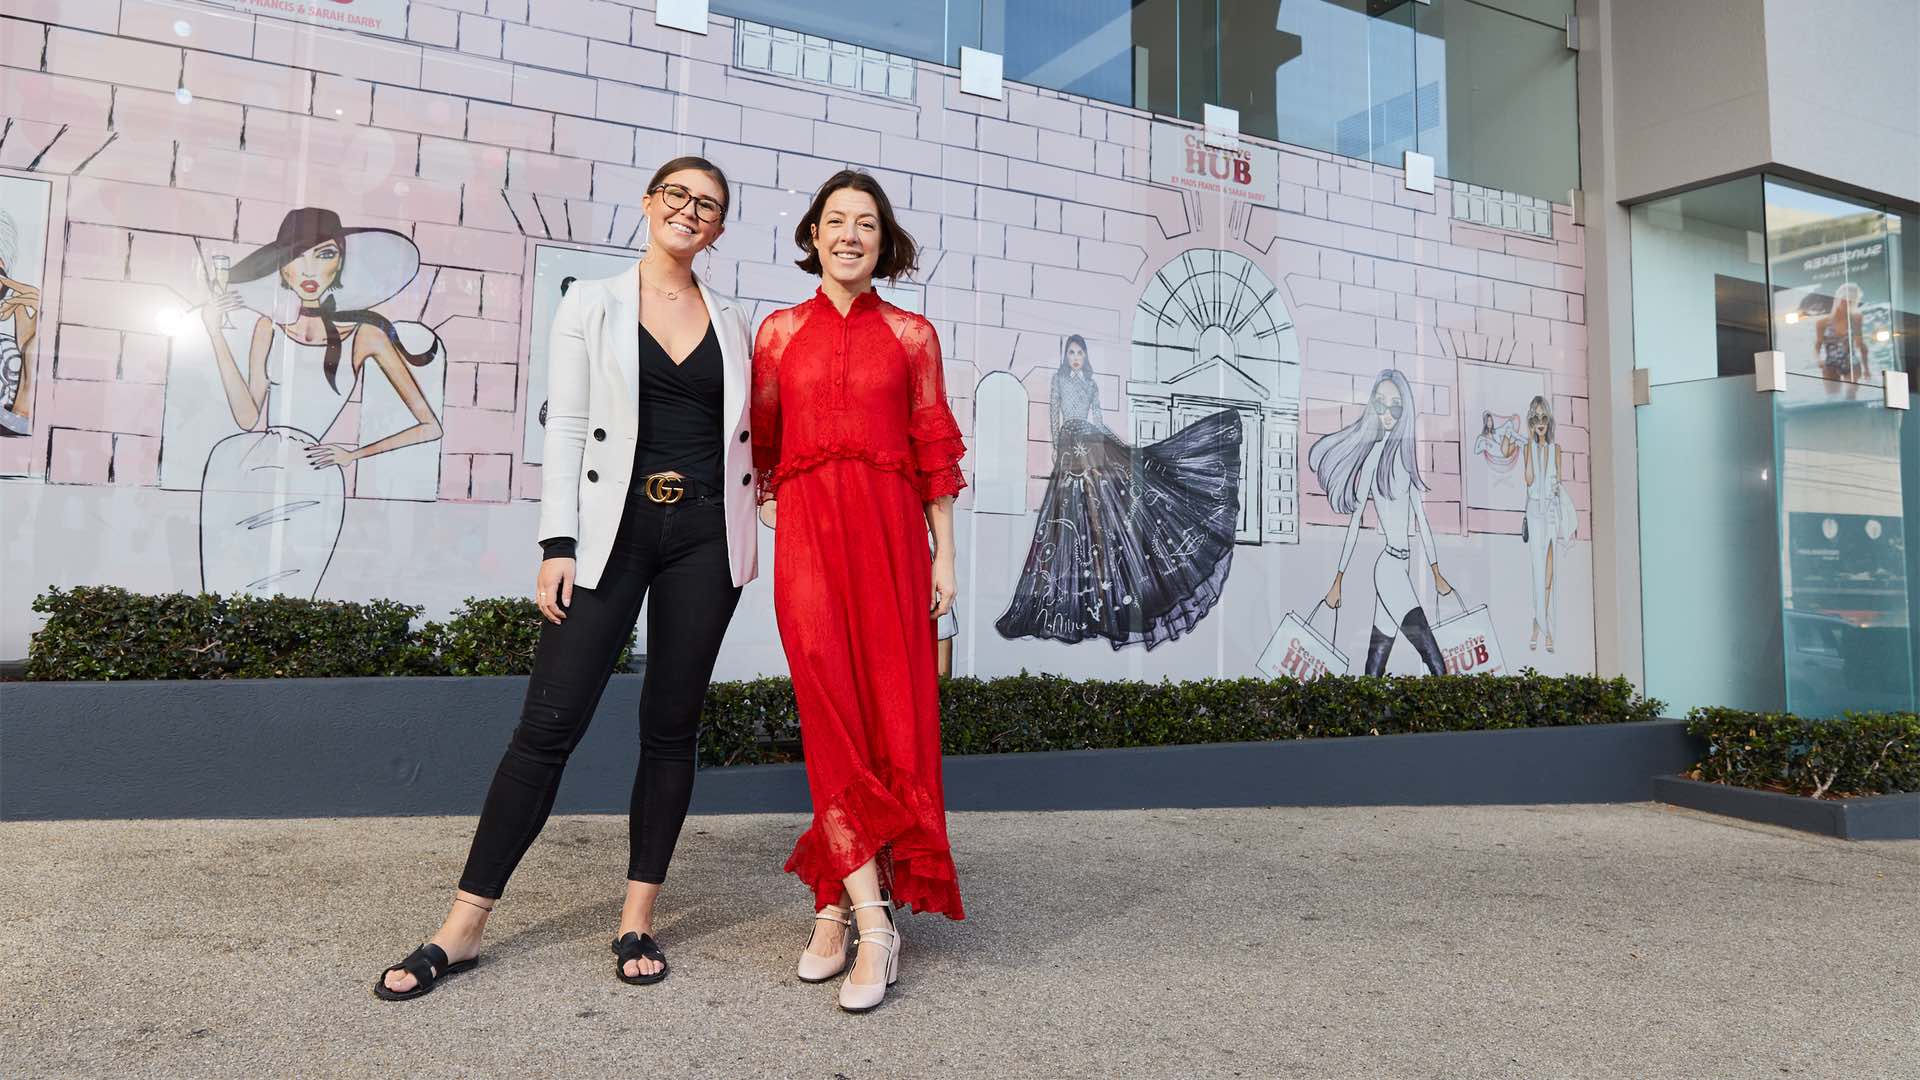 Creative Hub Is South Yarra's New OTT Gallery and Workshop Space